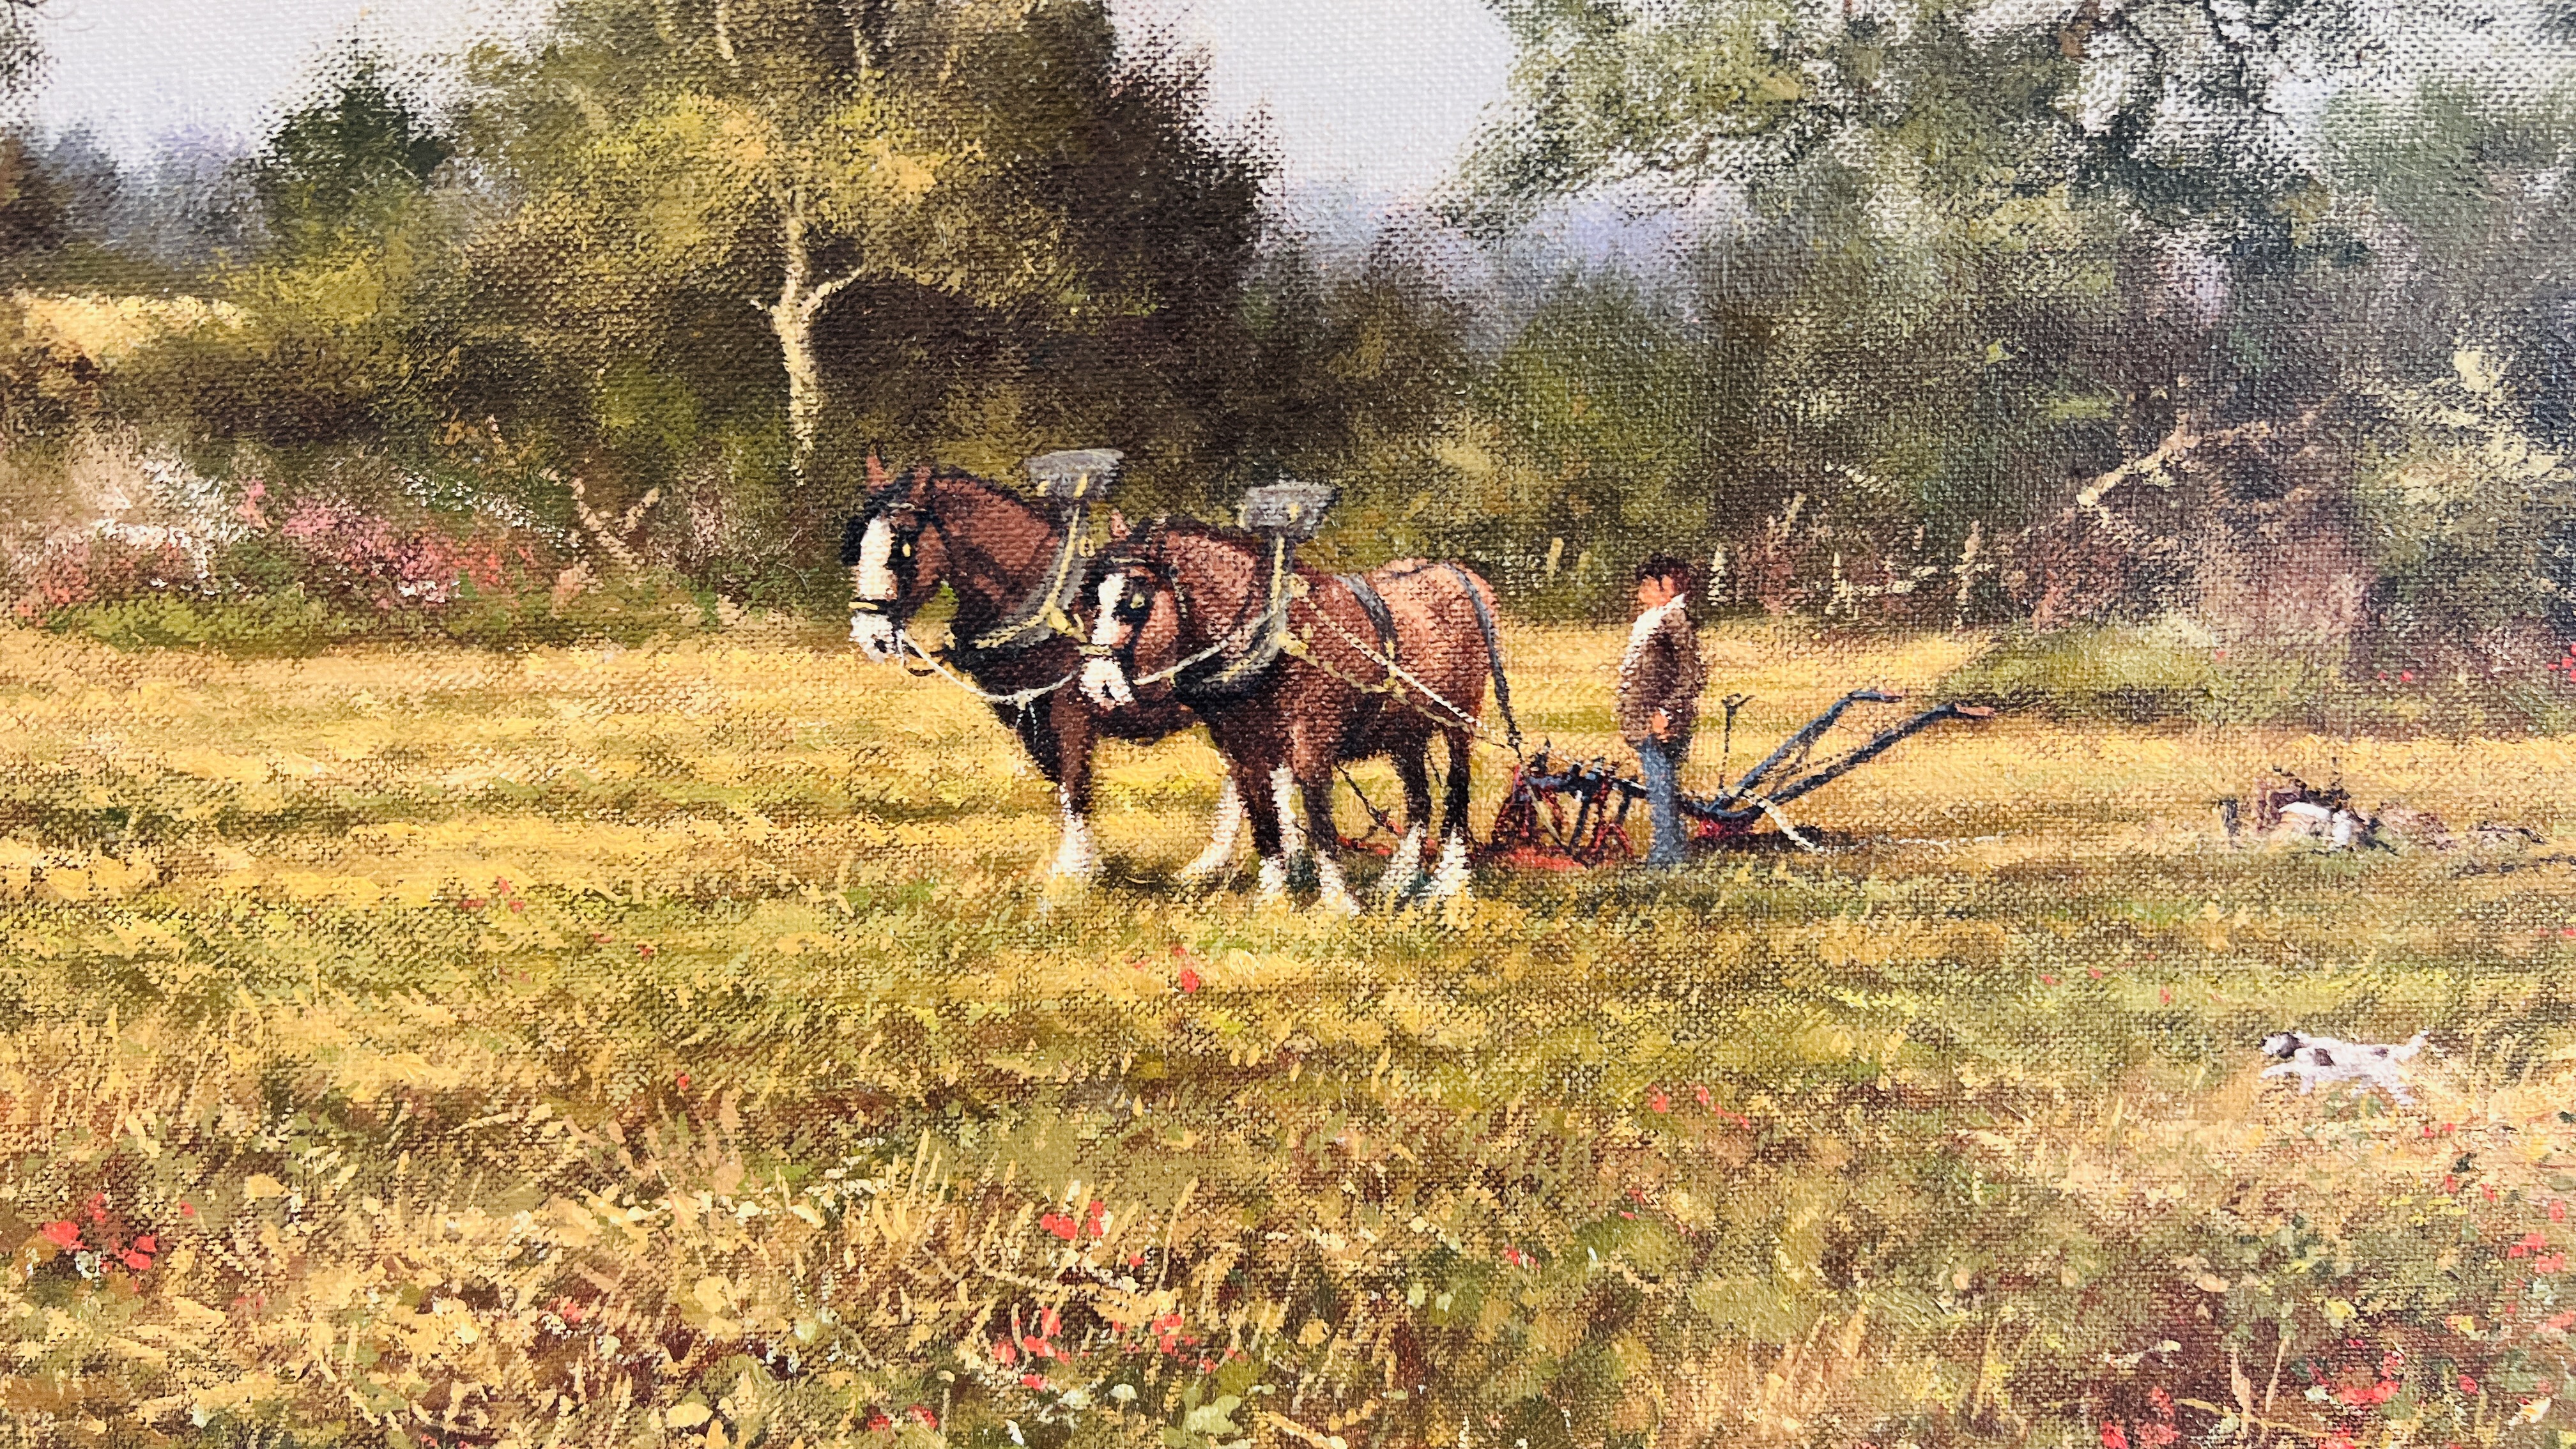 JAMES WRIGHT - "PLOUGHING" OIL ON CANVAS IN GILT FRAME, SIGNED, 75 X 60CM. - Image 3 of 4